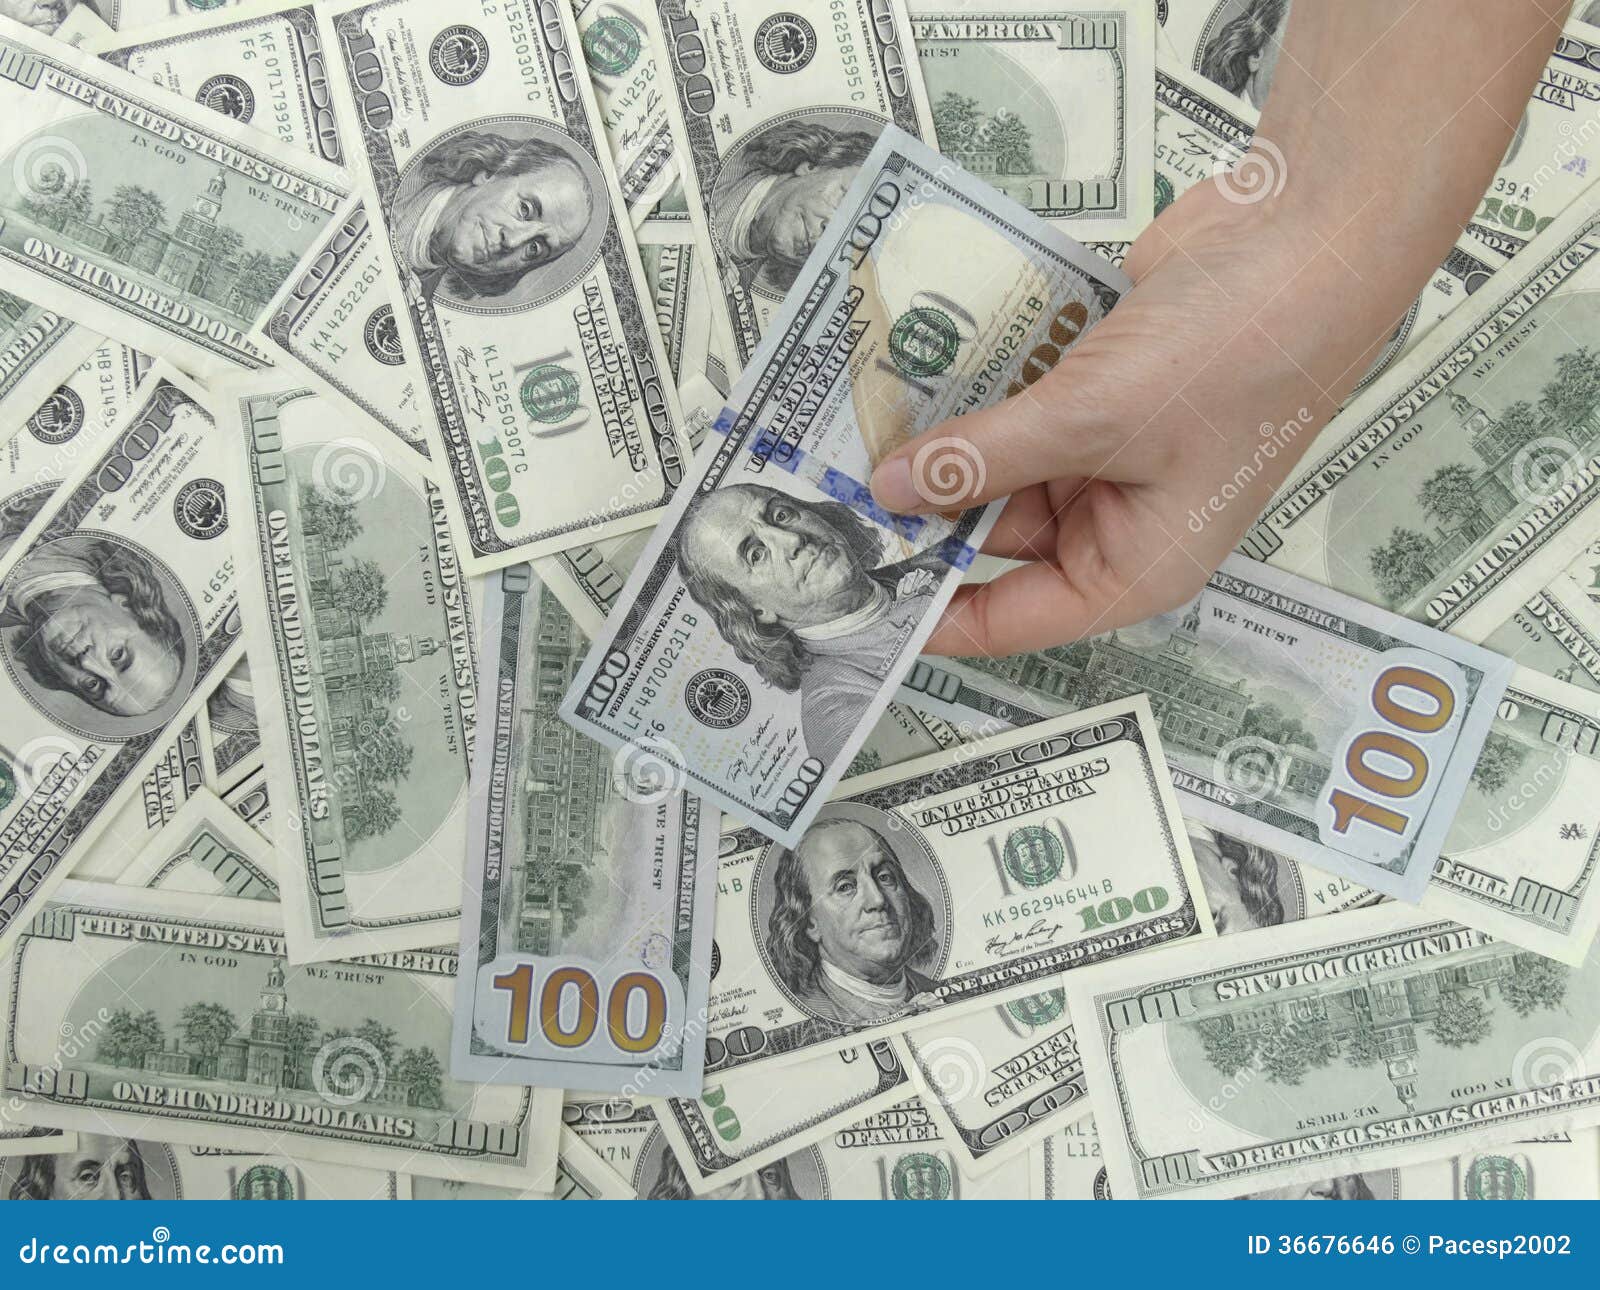 100 Dollars Bills And 1 Hand Background Royalty Free Stock Image